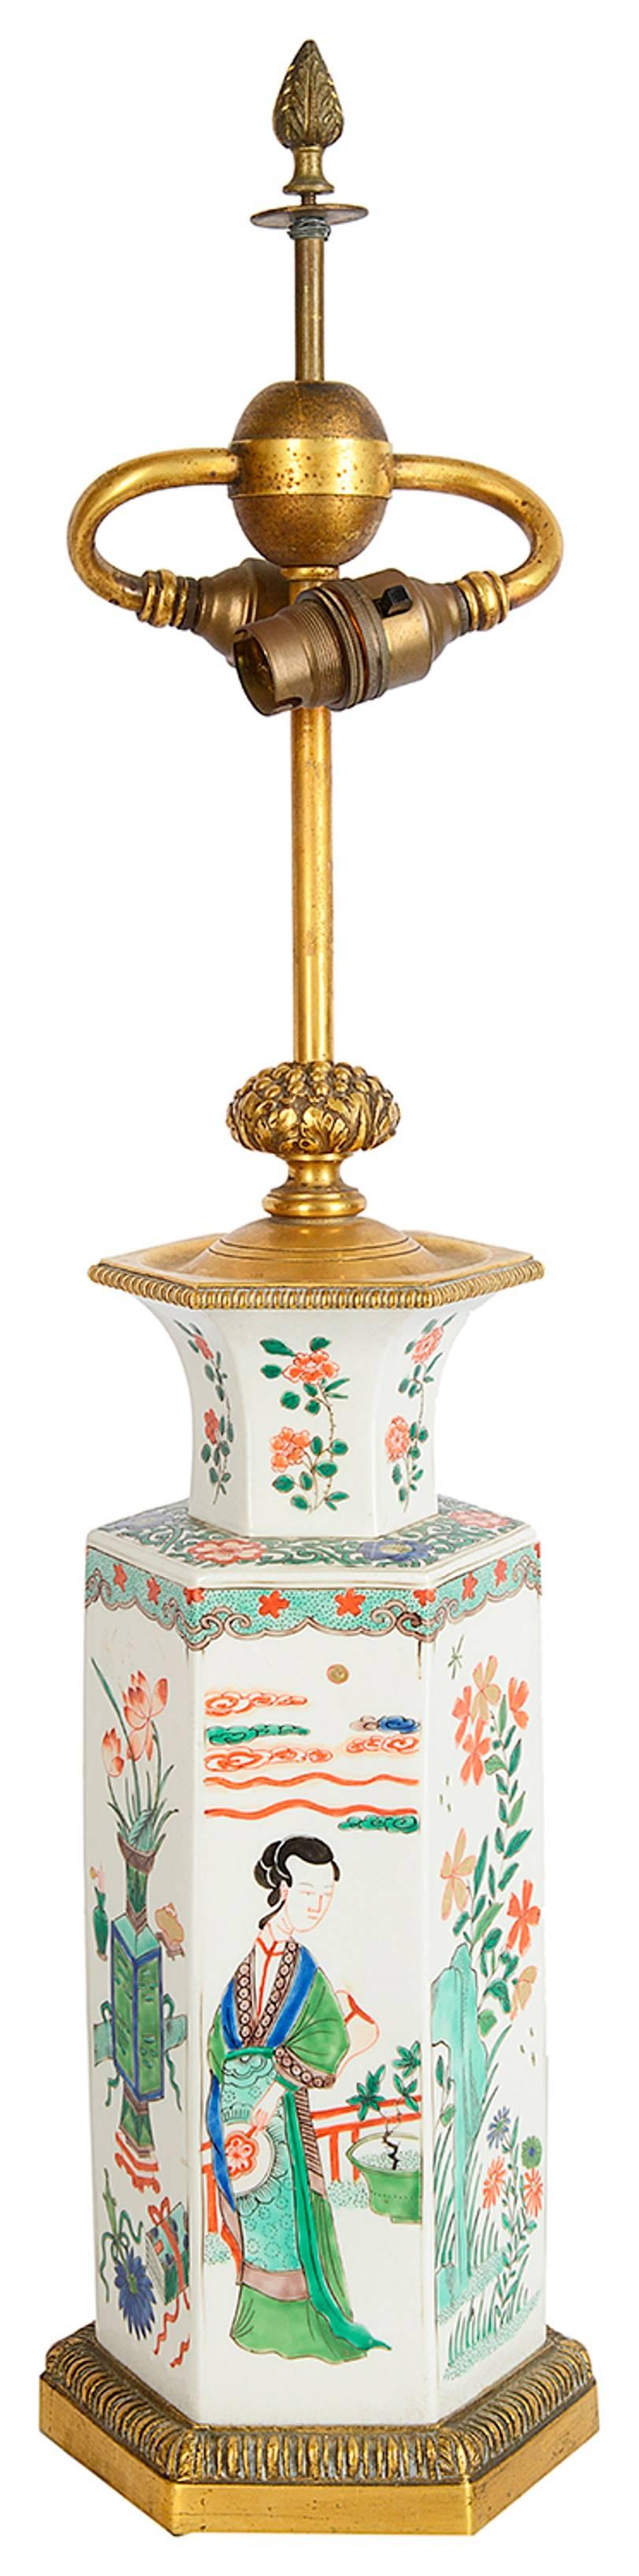 A good quality 19th century Chinese famille verte style (Samson) hexagonal vase, having scenes of girls amongst flowers, leaves and vases, mounted on a gilded ormolu base.